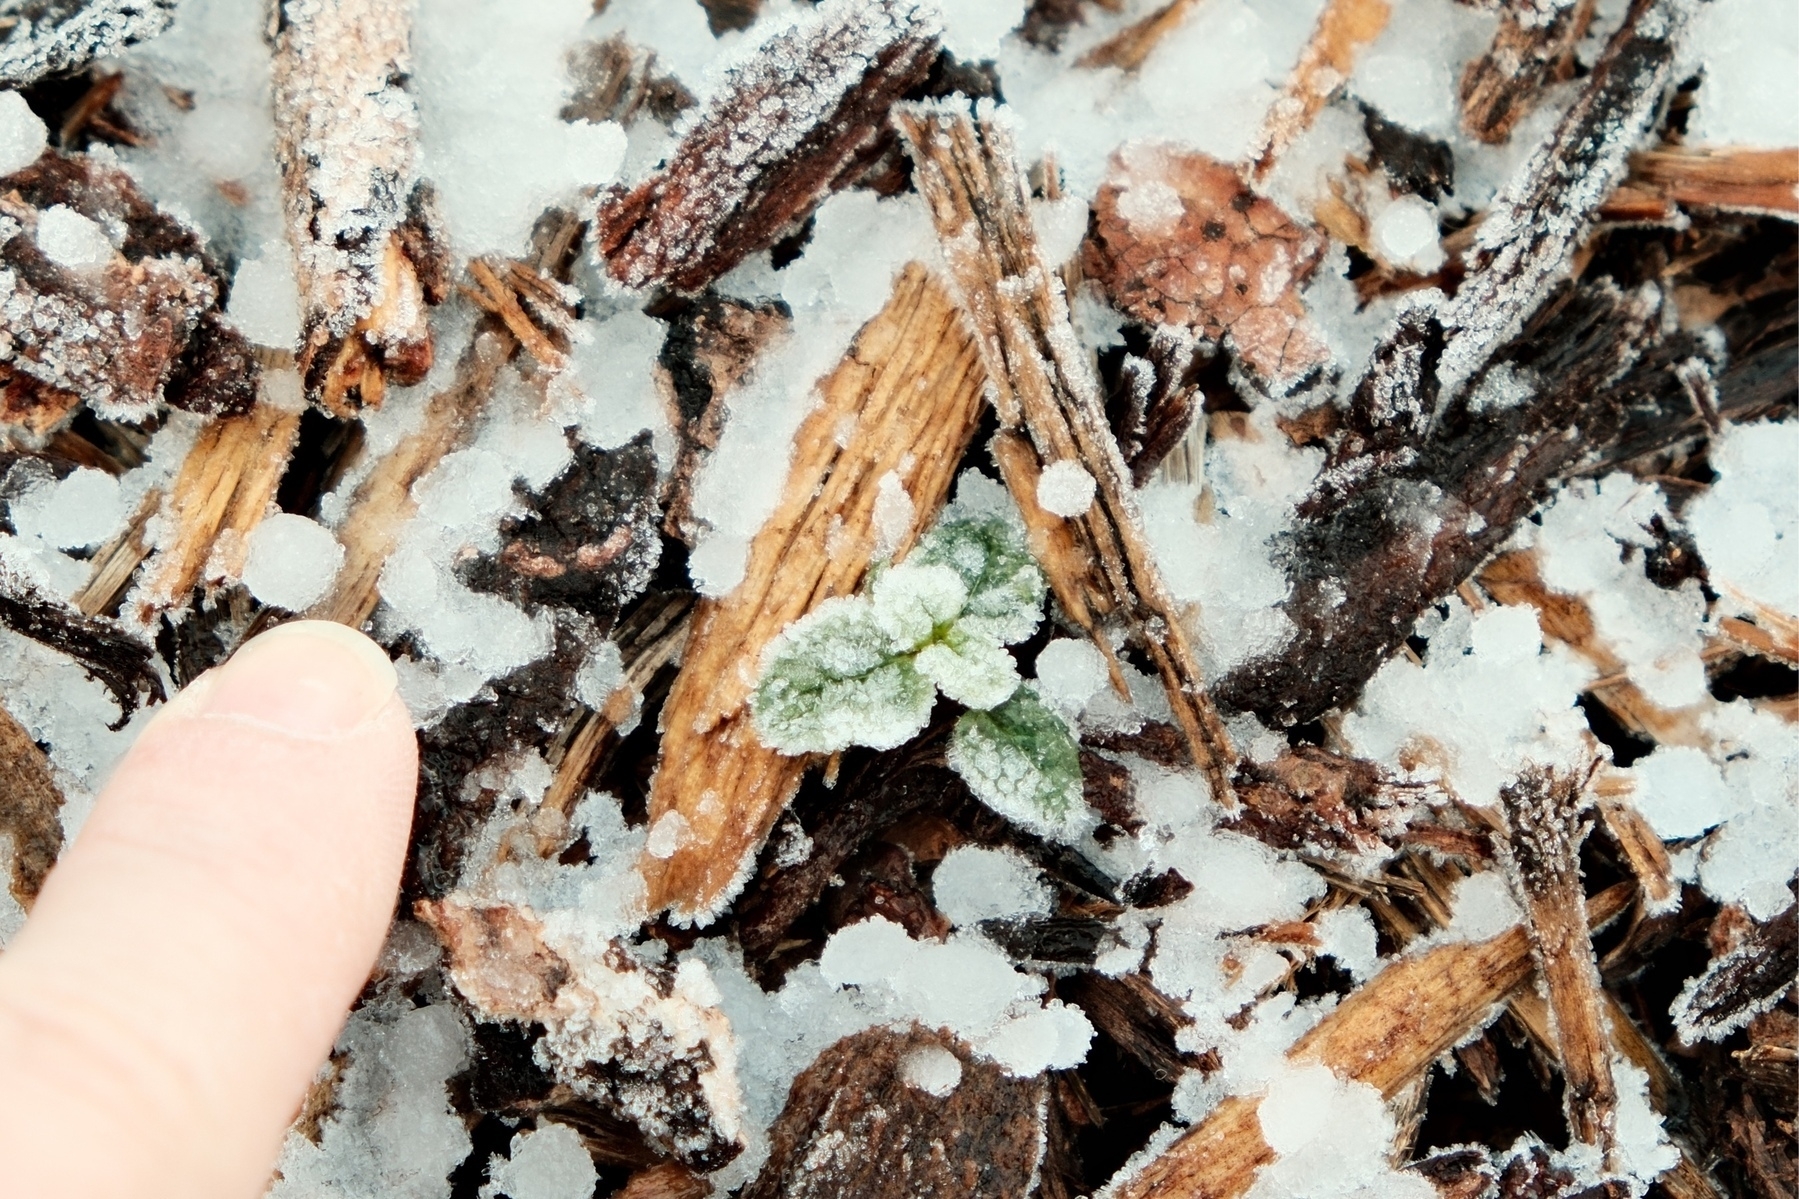 pea sized hail on bark with a frosty seedling. A finger for scale.